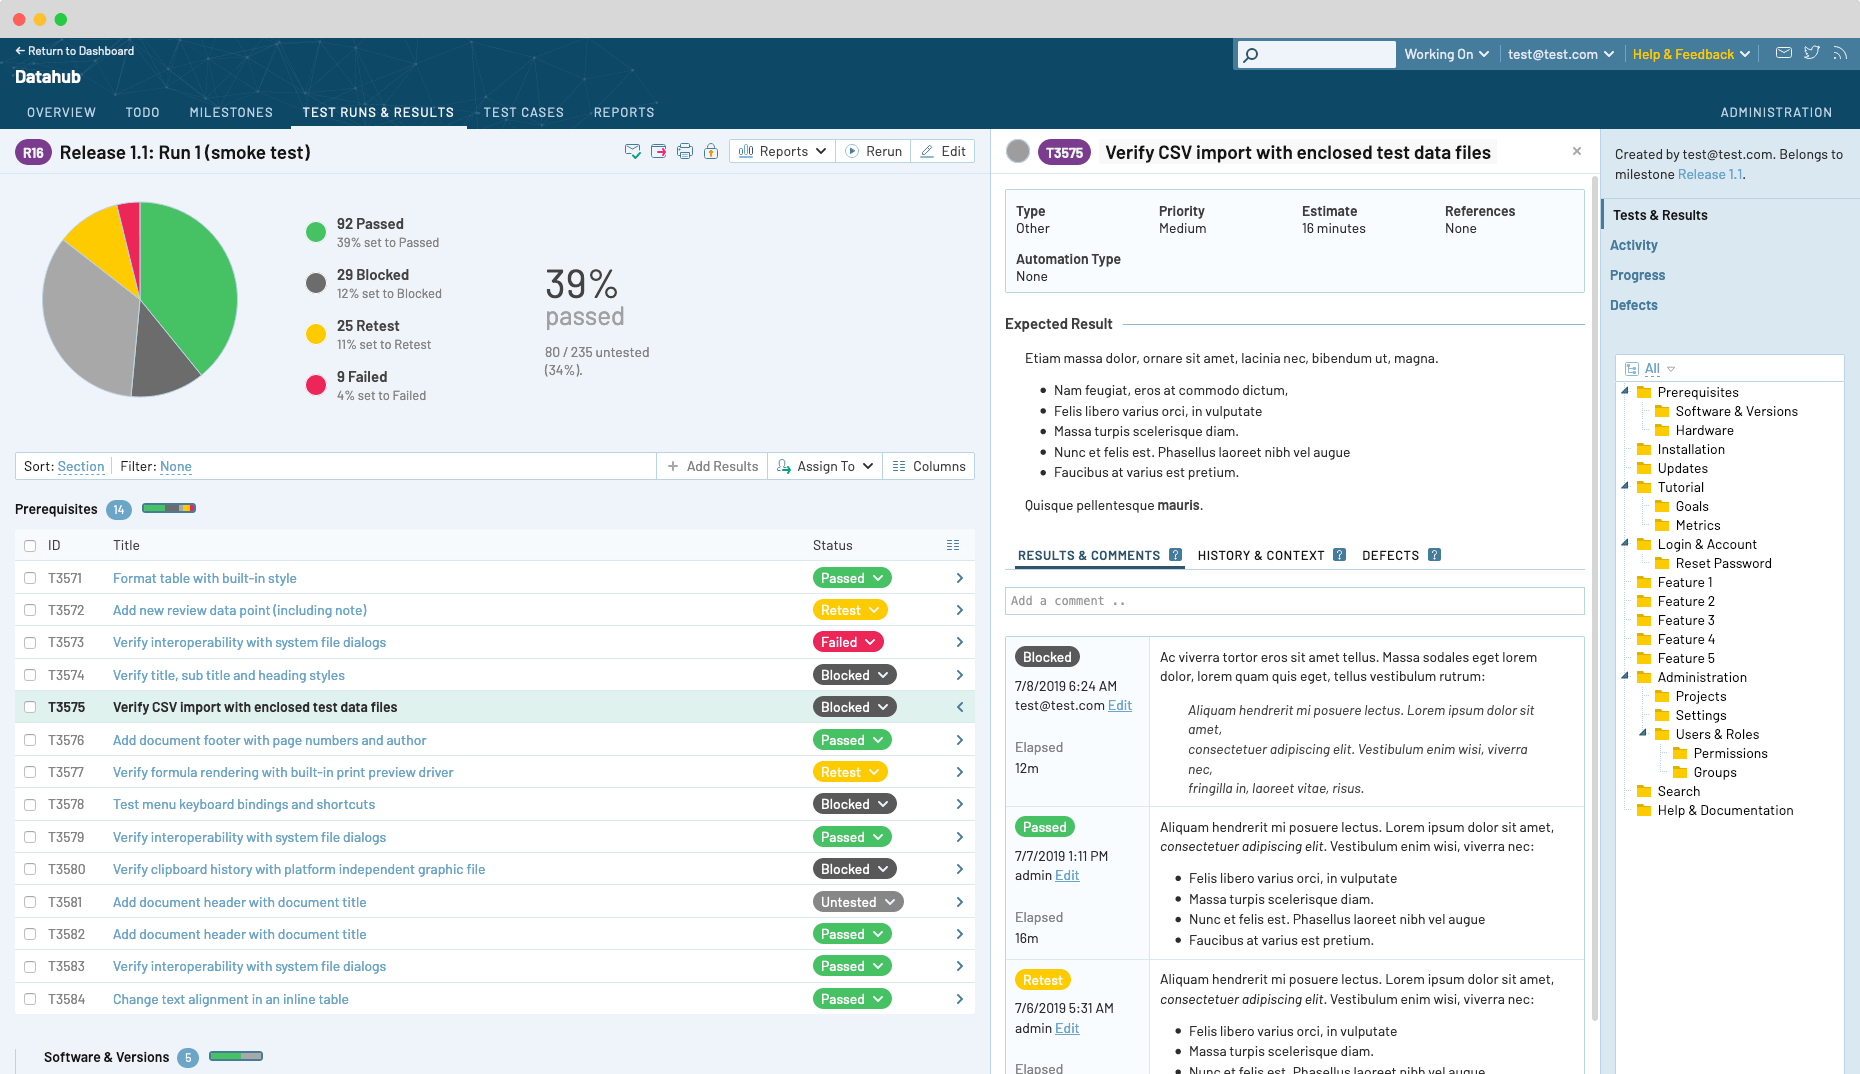 Centralized test management: All in one place - manage, organize and track all your testing efforts in a central place.